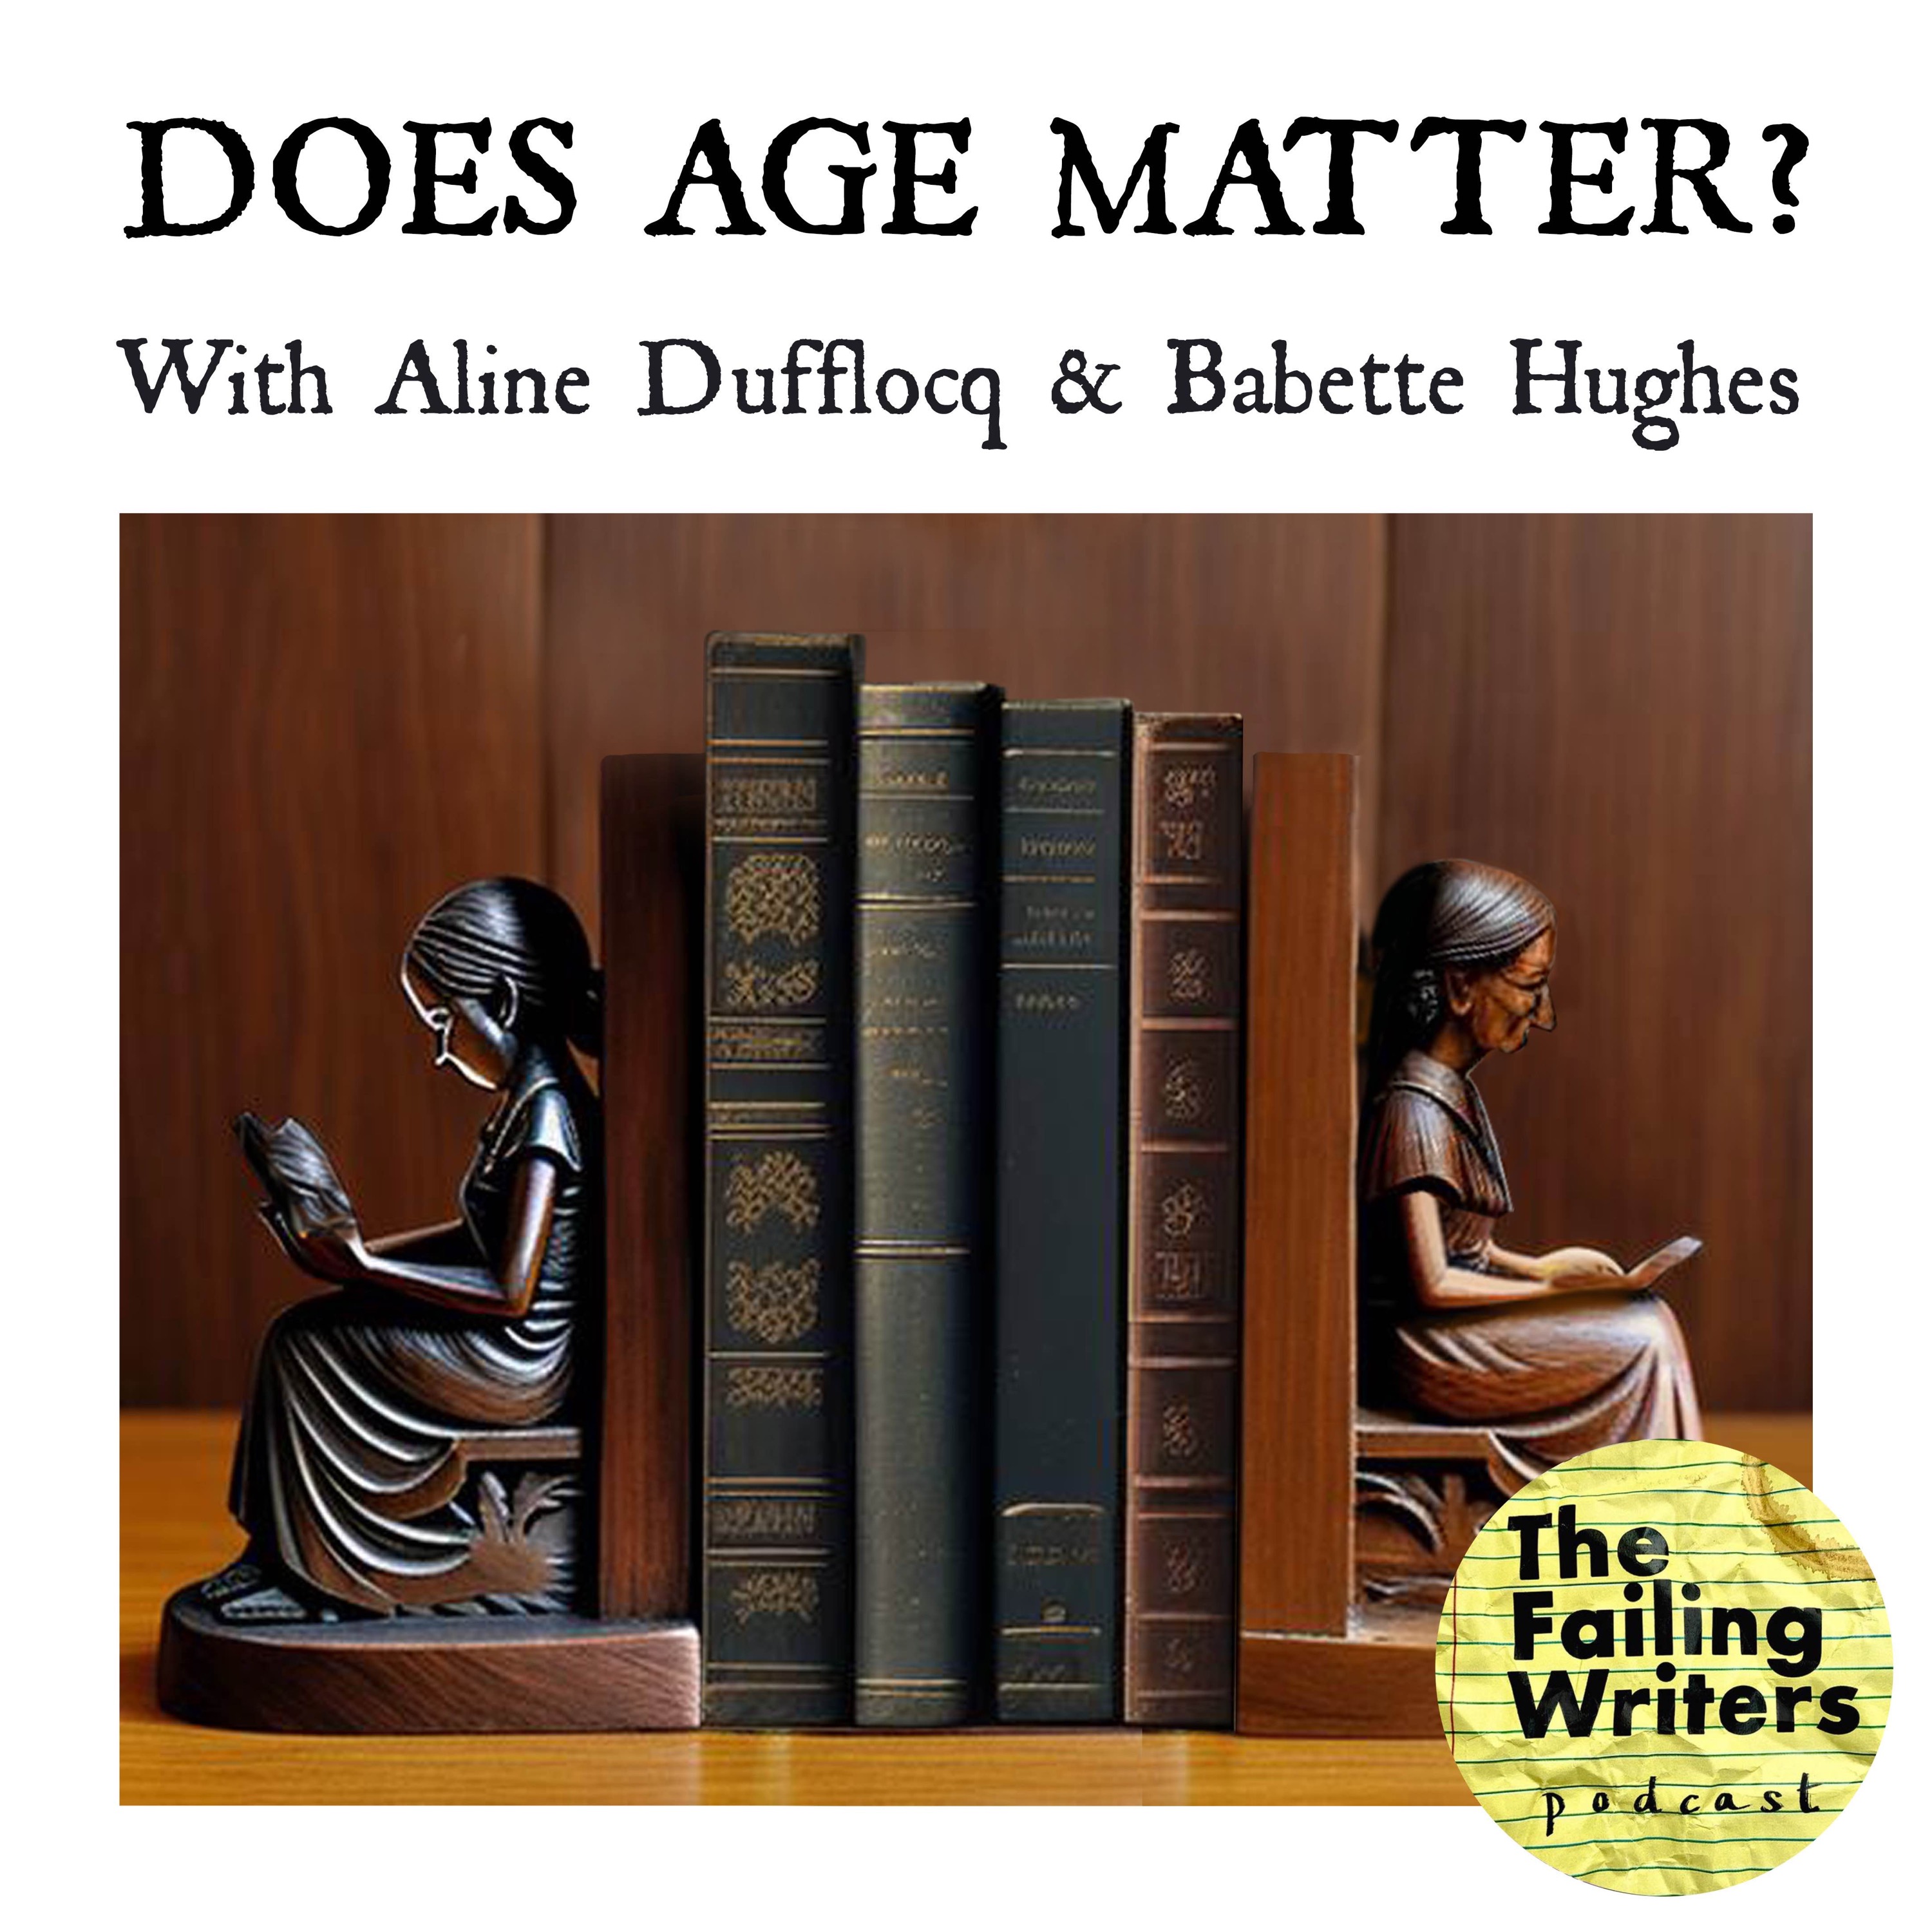 S4 Ep10: Does Age Matter? with Aline Dufflocq & Babette Hughes